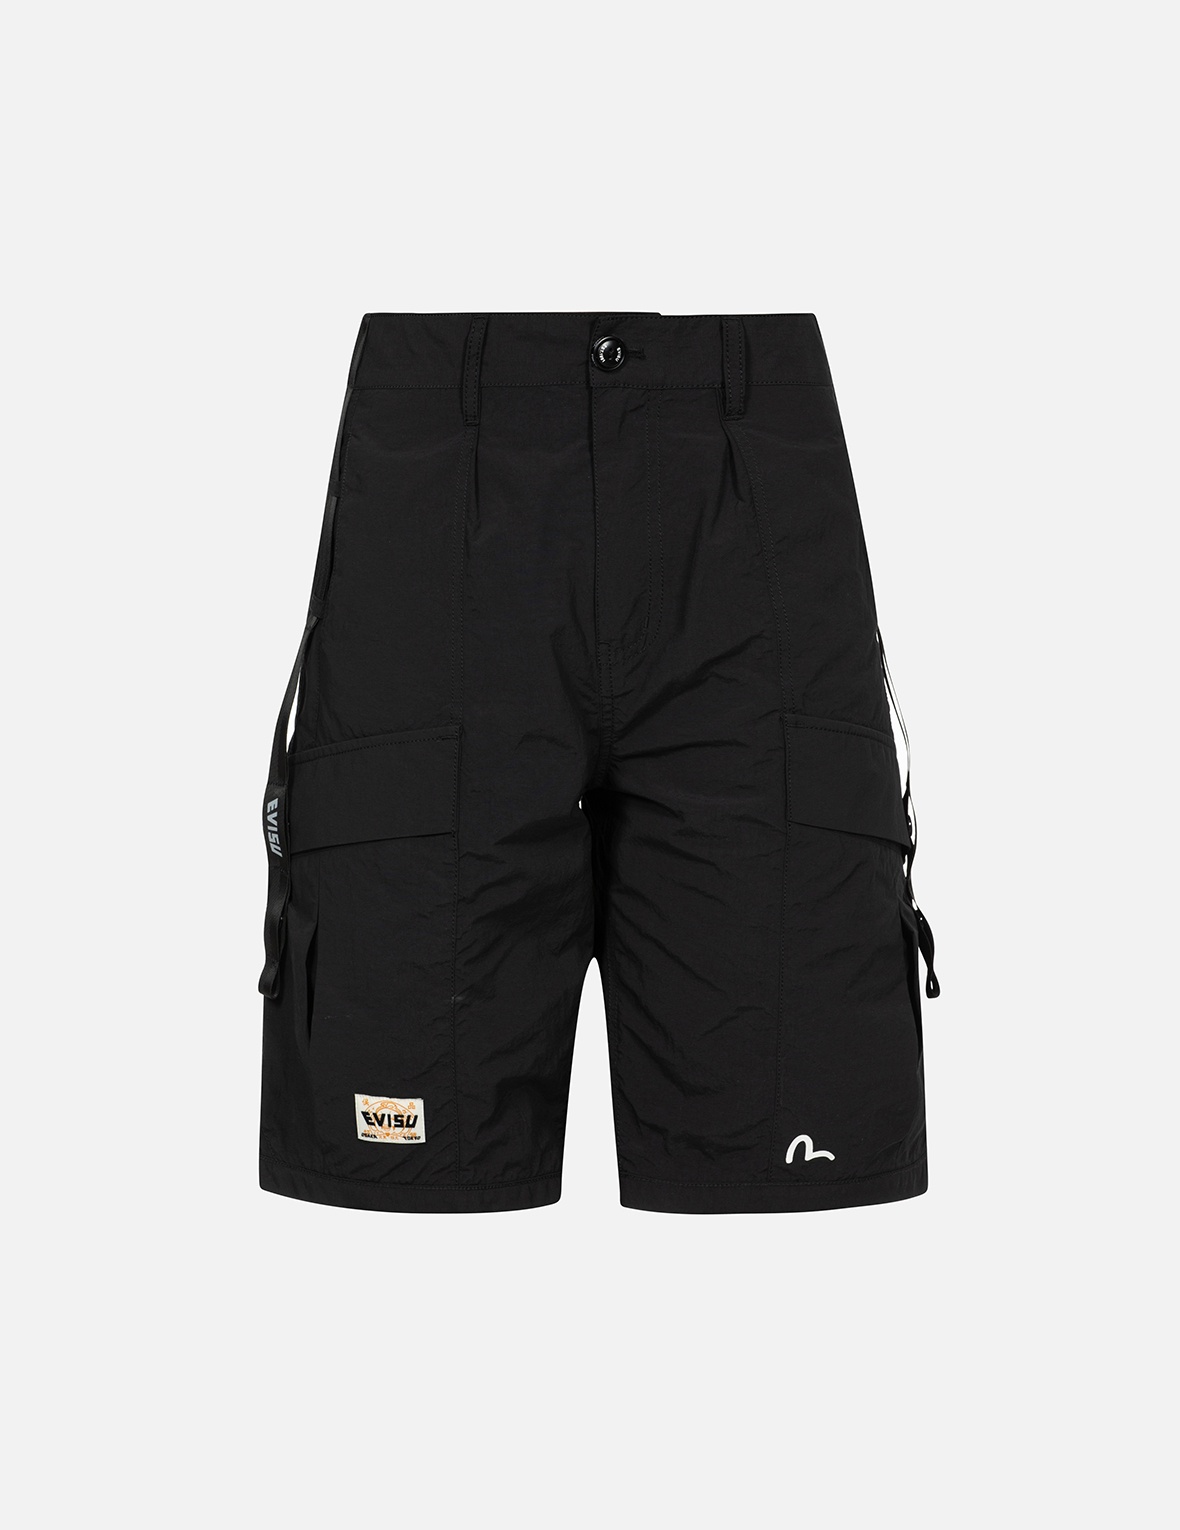 REFLECTIVE MULTI-PRINTS RELAX FIT SHORTS - 1